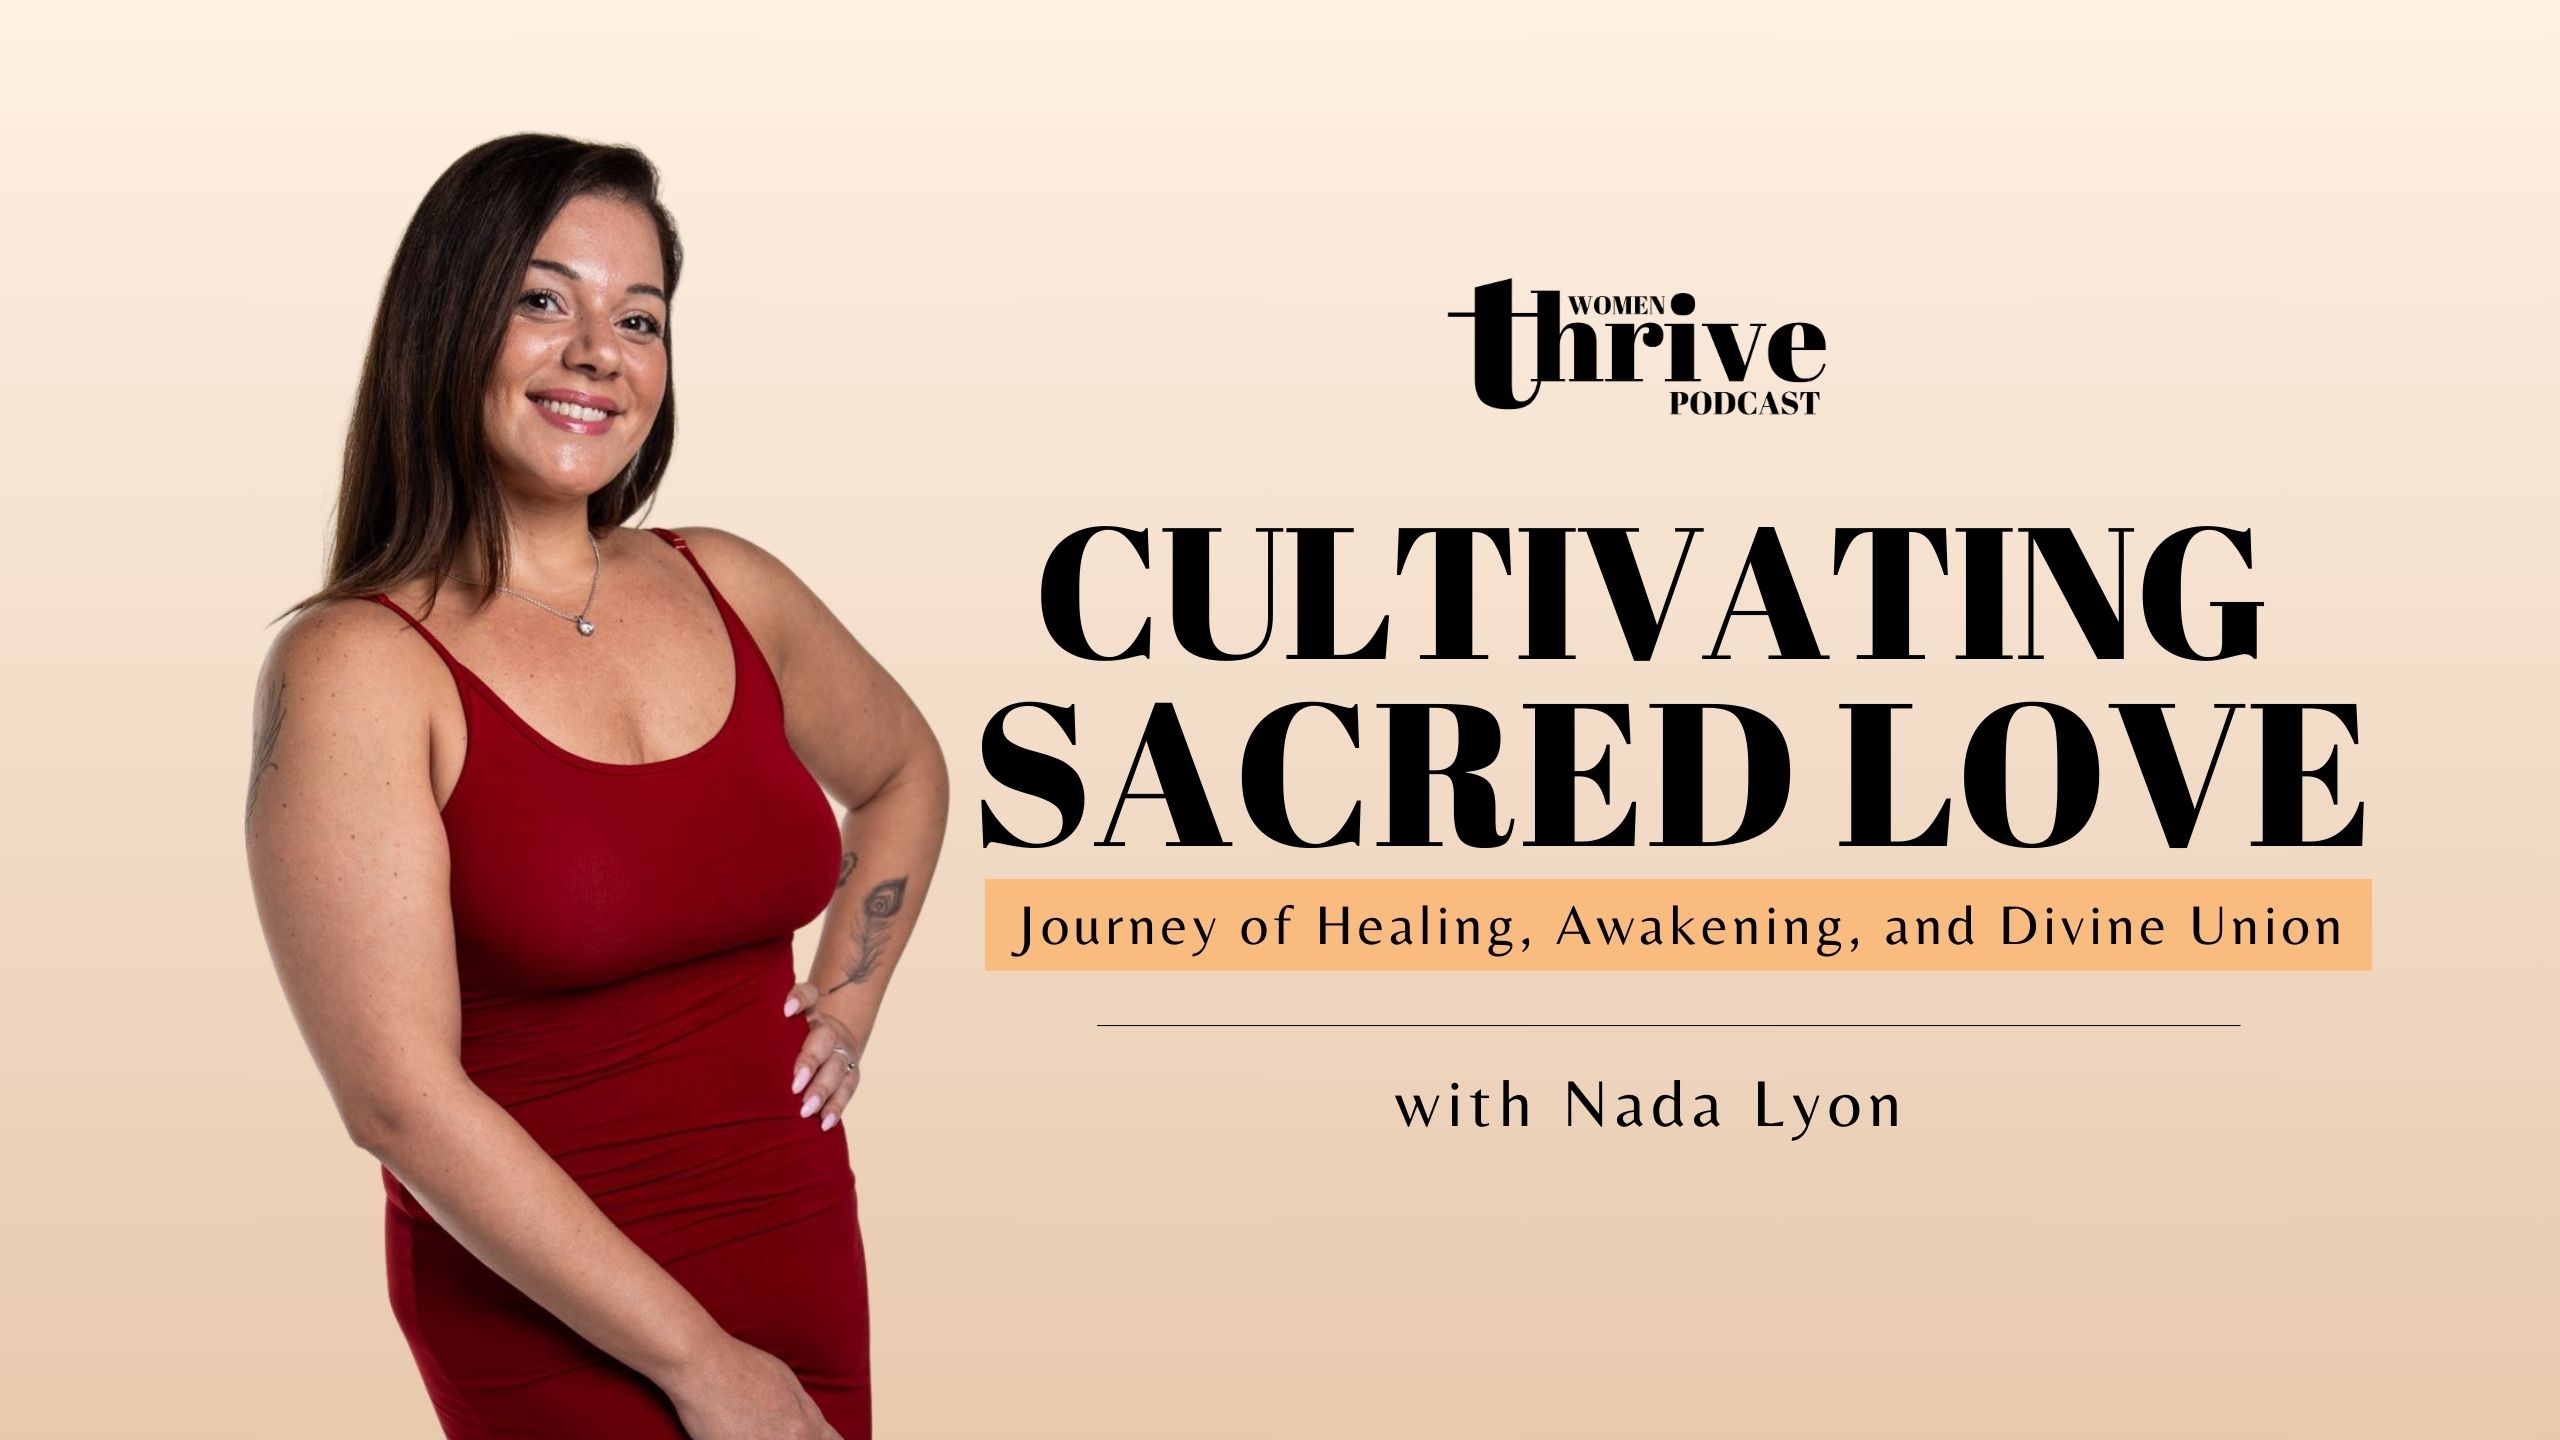 Cultivating Sacred Love: Journey of Healing, Awakening and Divine Union with Nada Lyon